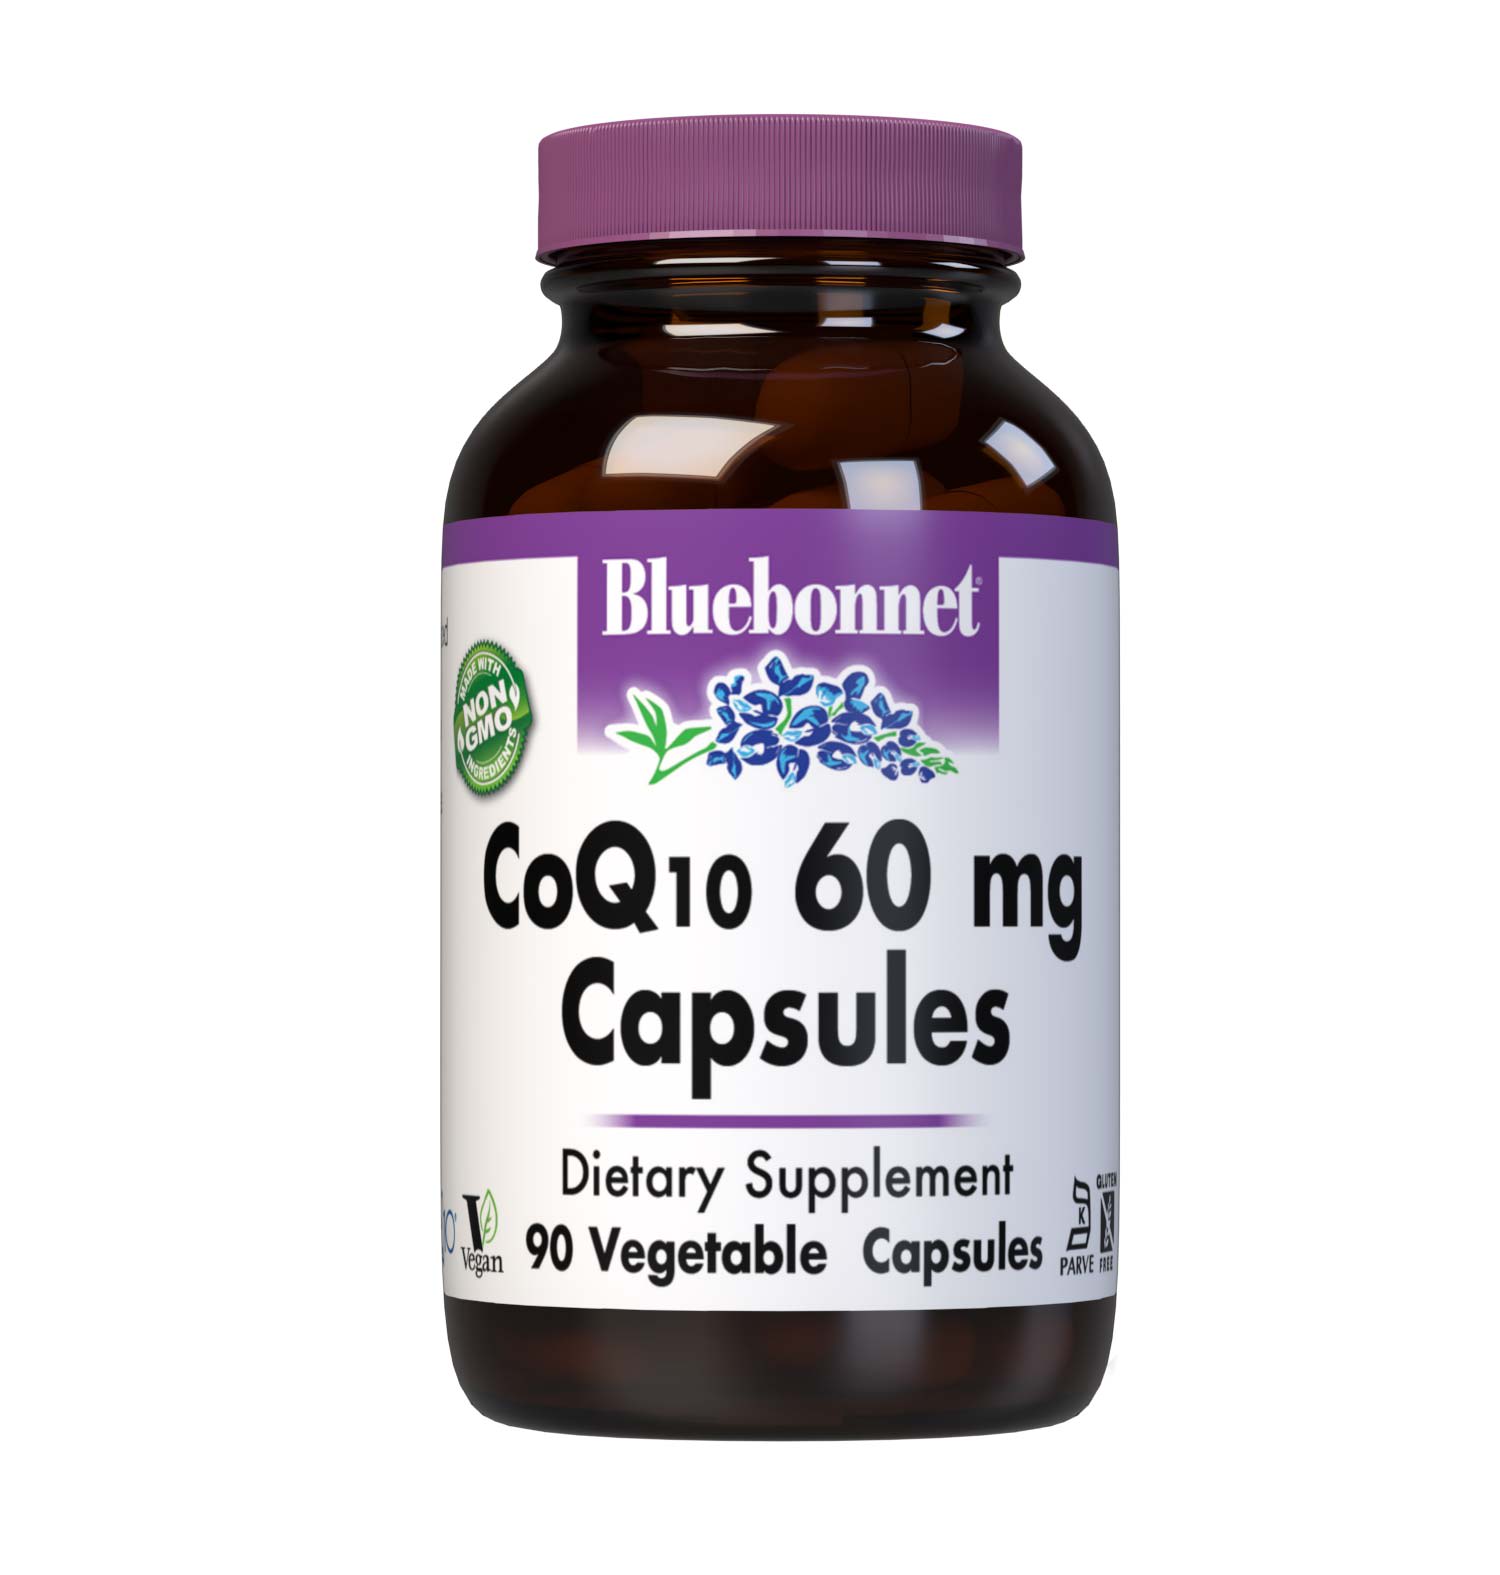 Bluebonnet’s CoQ10 60 mg 90 Vegetable Capsules provide 100% “trans-isomer” coenzyme Q10. #size_90 count